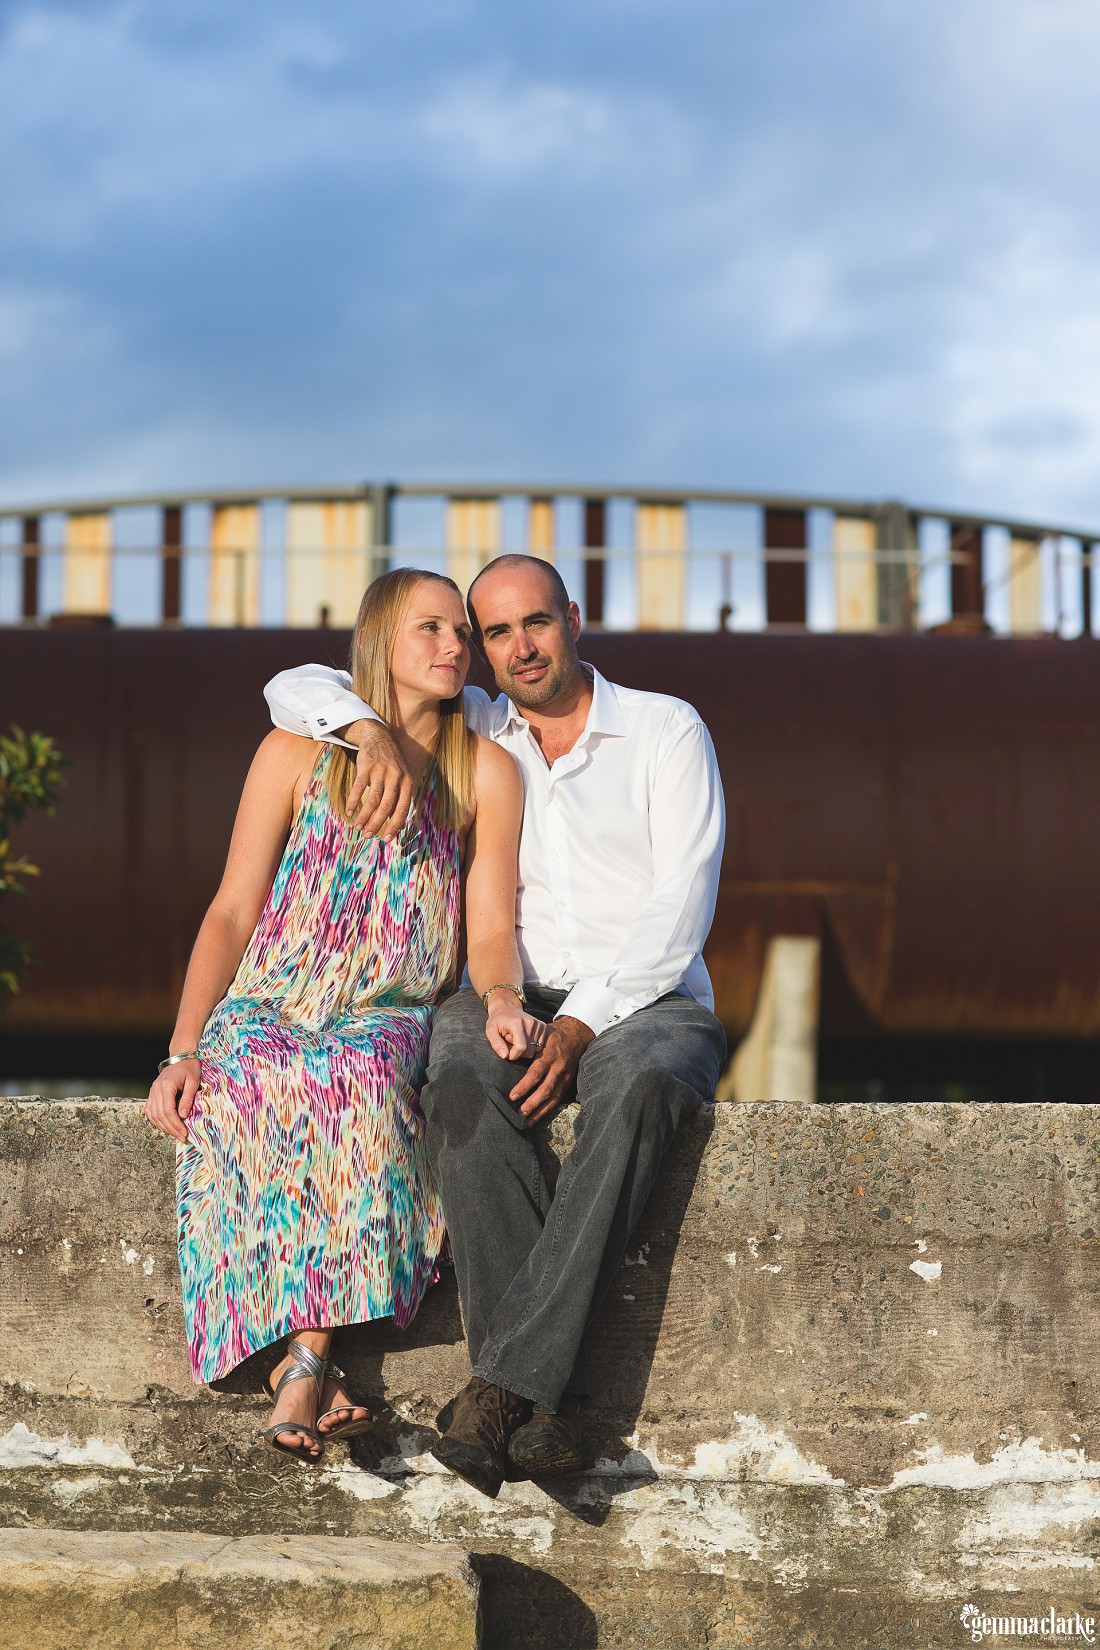 A man and woman sitting together on a concrete wall in the early morning sun - Ballast Point Park Portraits